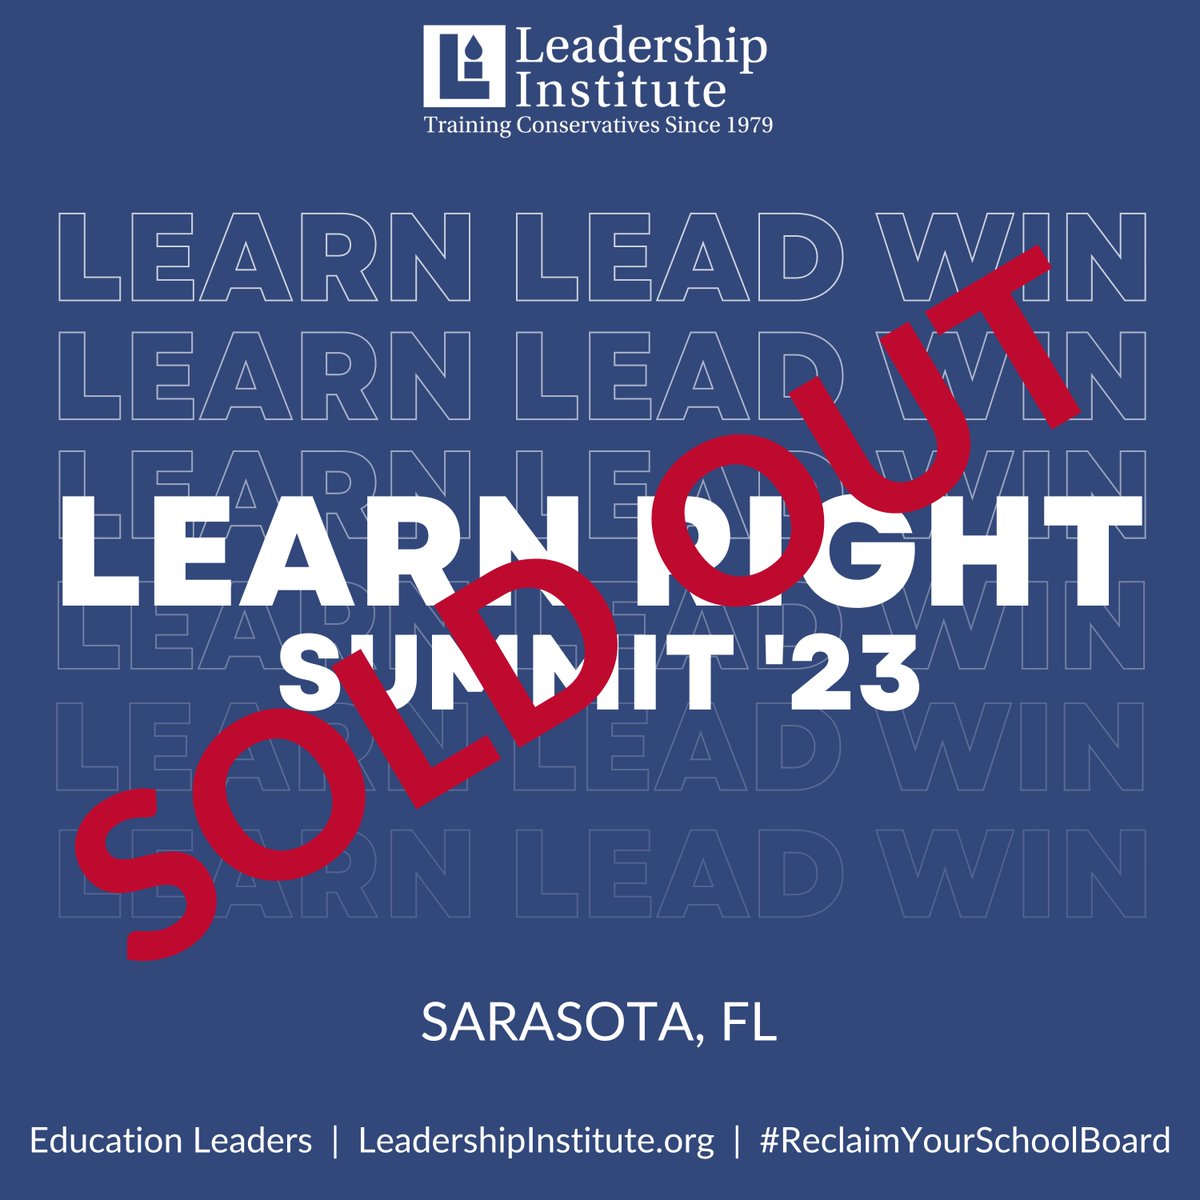 We are proud to announce our Learn Right: Education Leaders Summit is SOLD OUT! Over 300 attendees are going to #LearnRight this weekend!